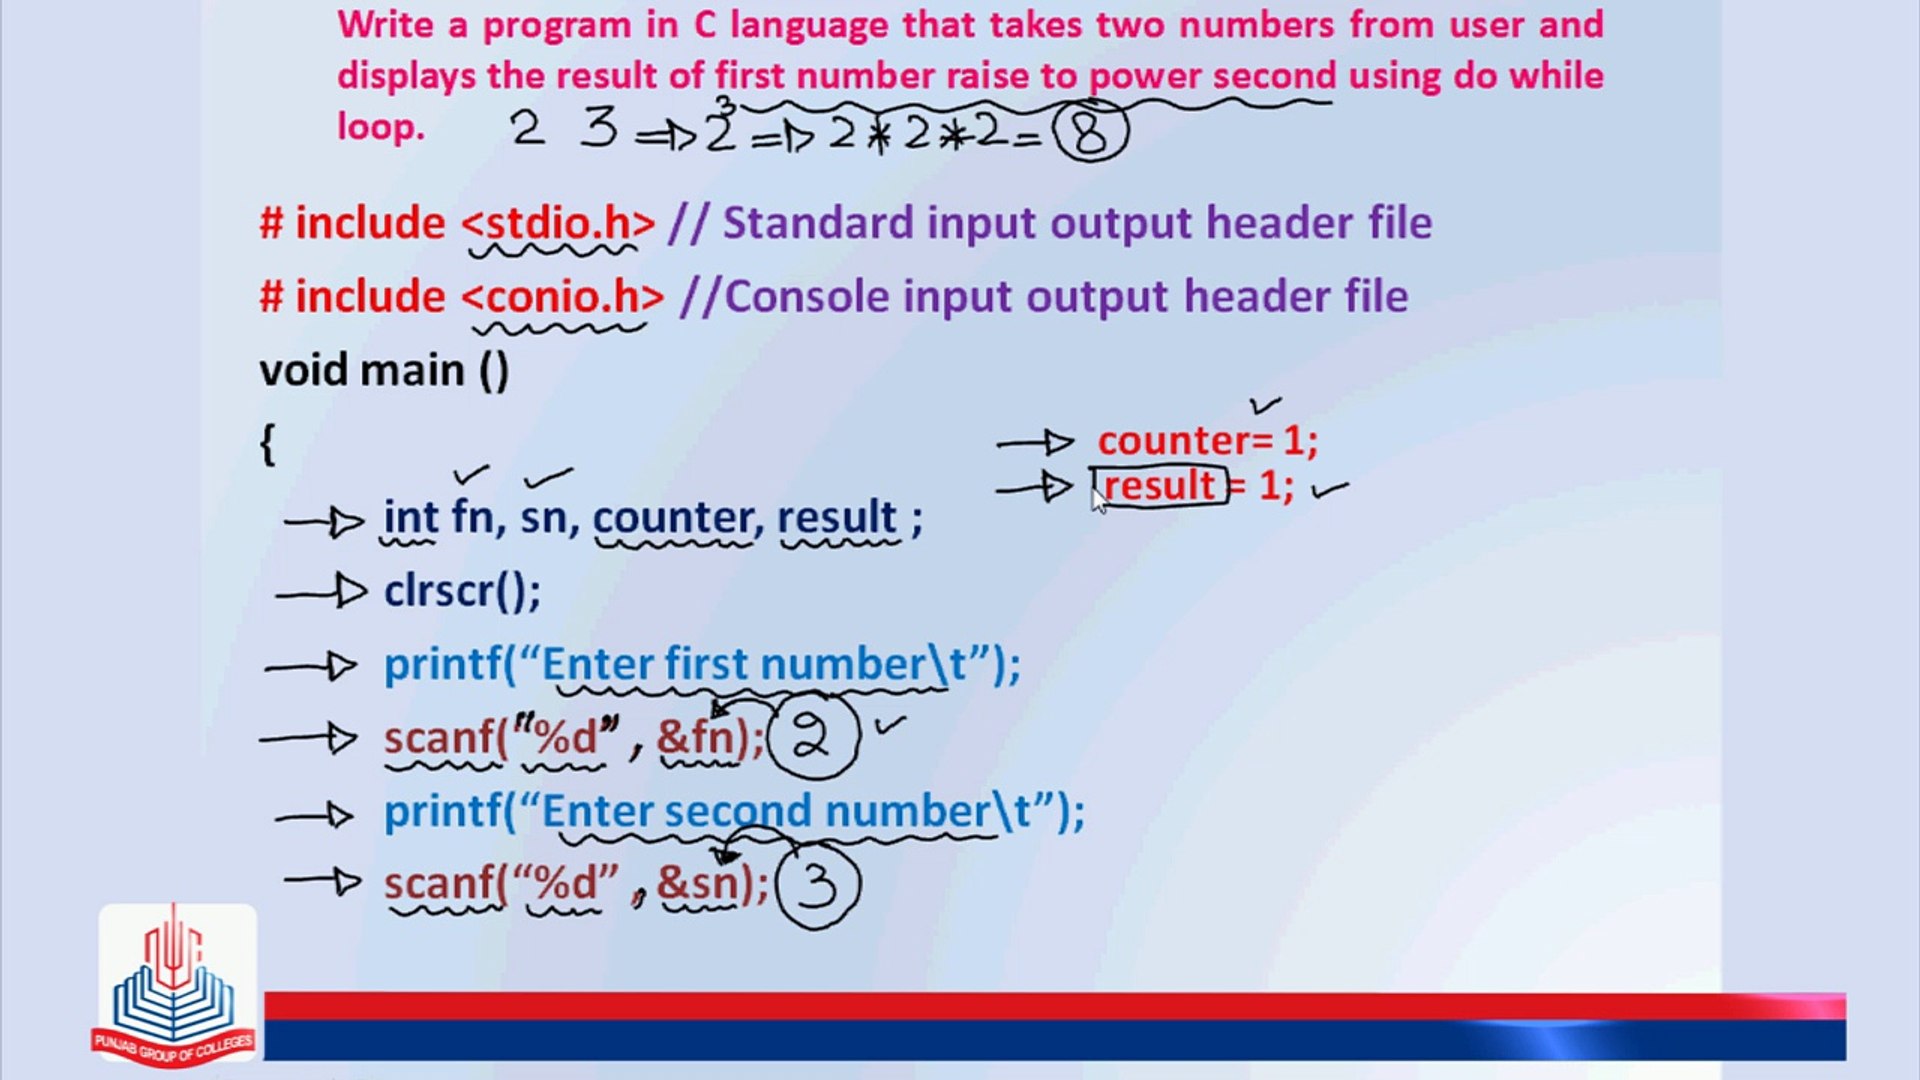 C Program: Write a program in C language taht takes two numbers from user  and displays the result of first numbers raise to power secong using do  while loop